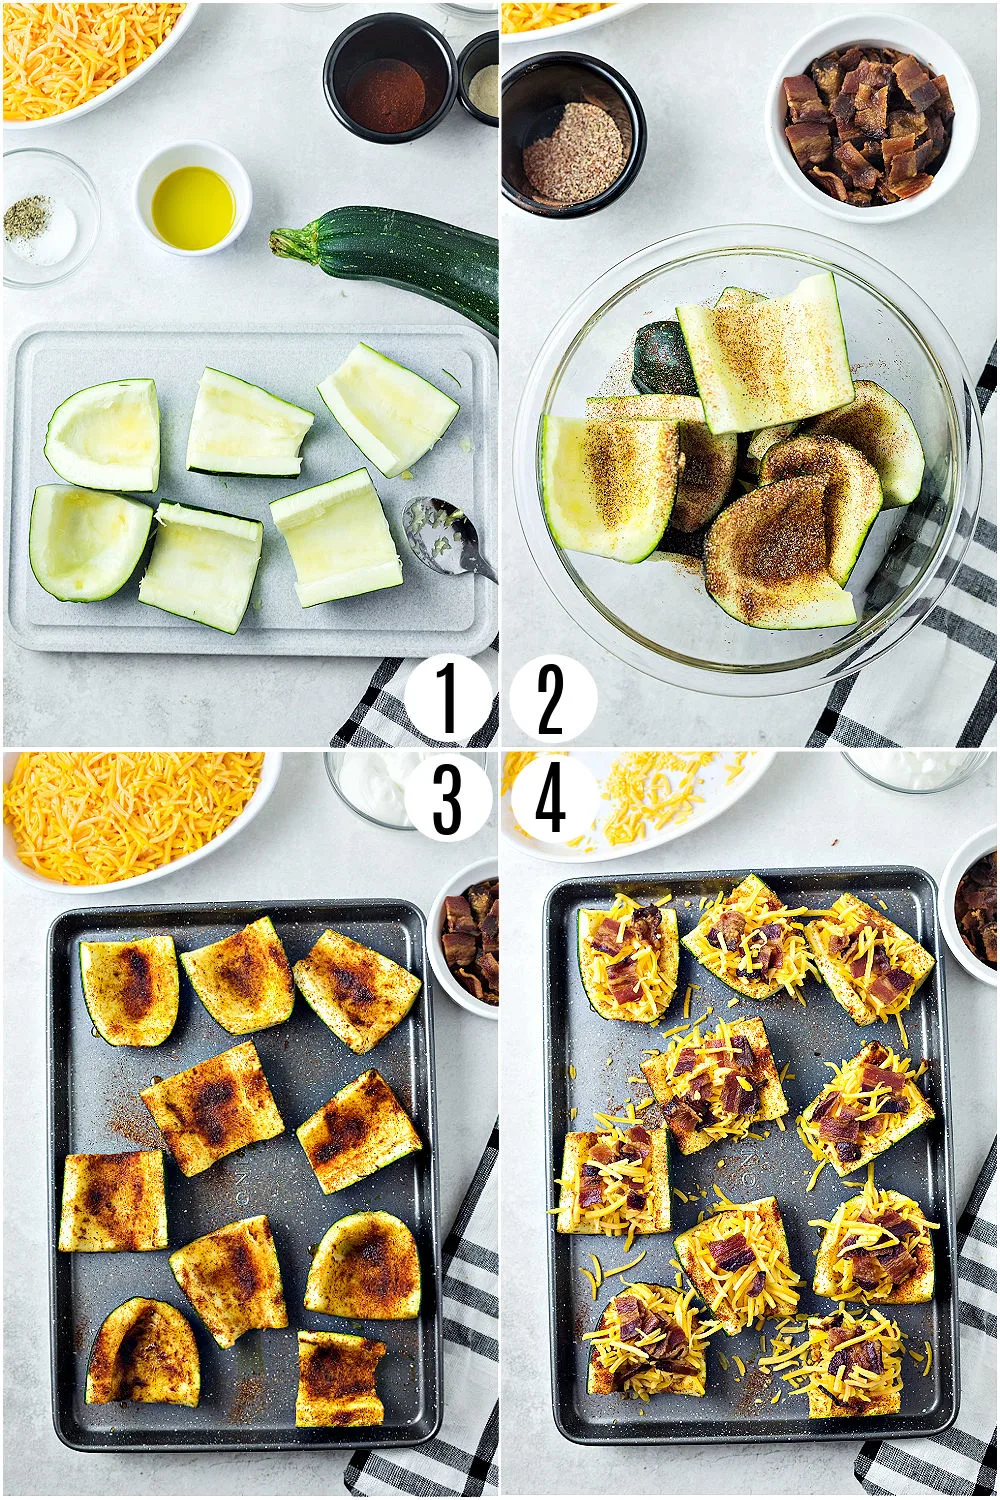 Step by step photos showing how to make zucchini with toppings.